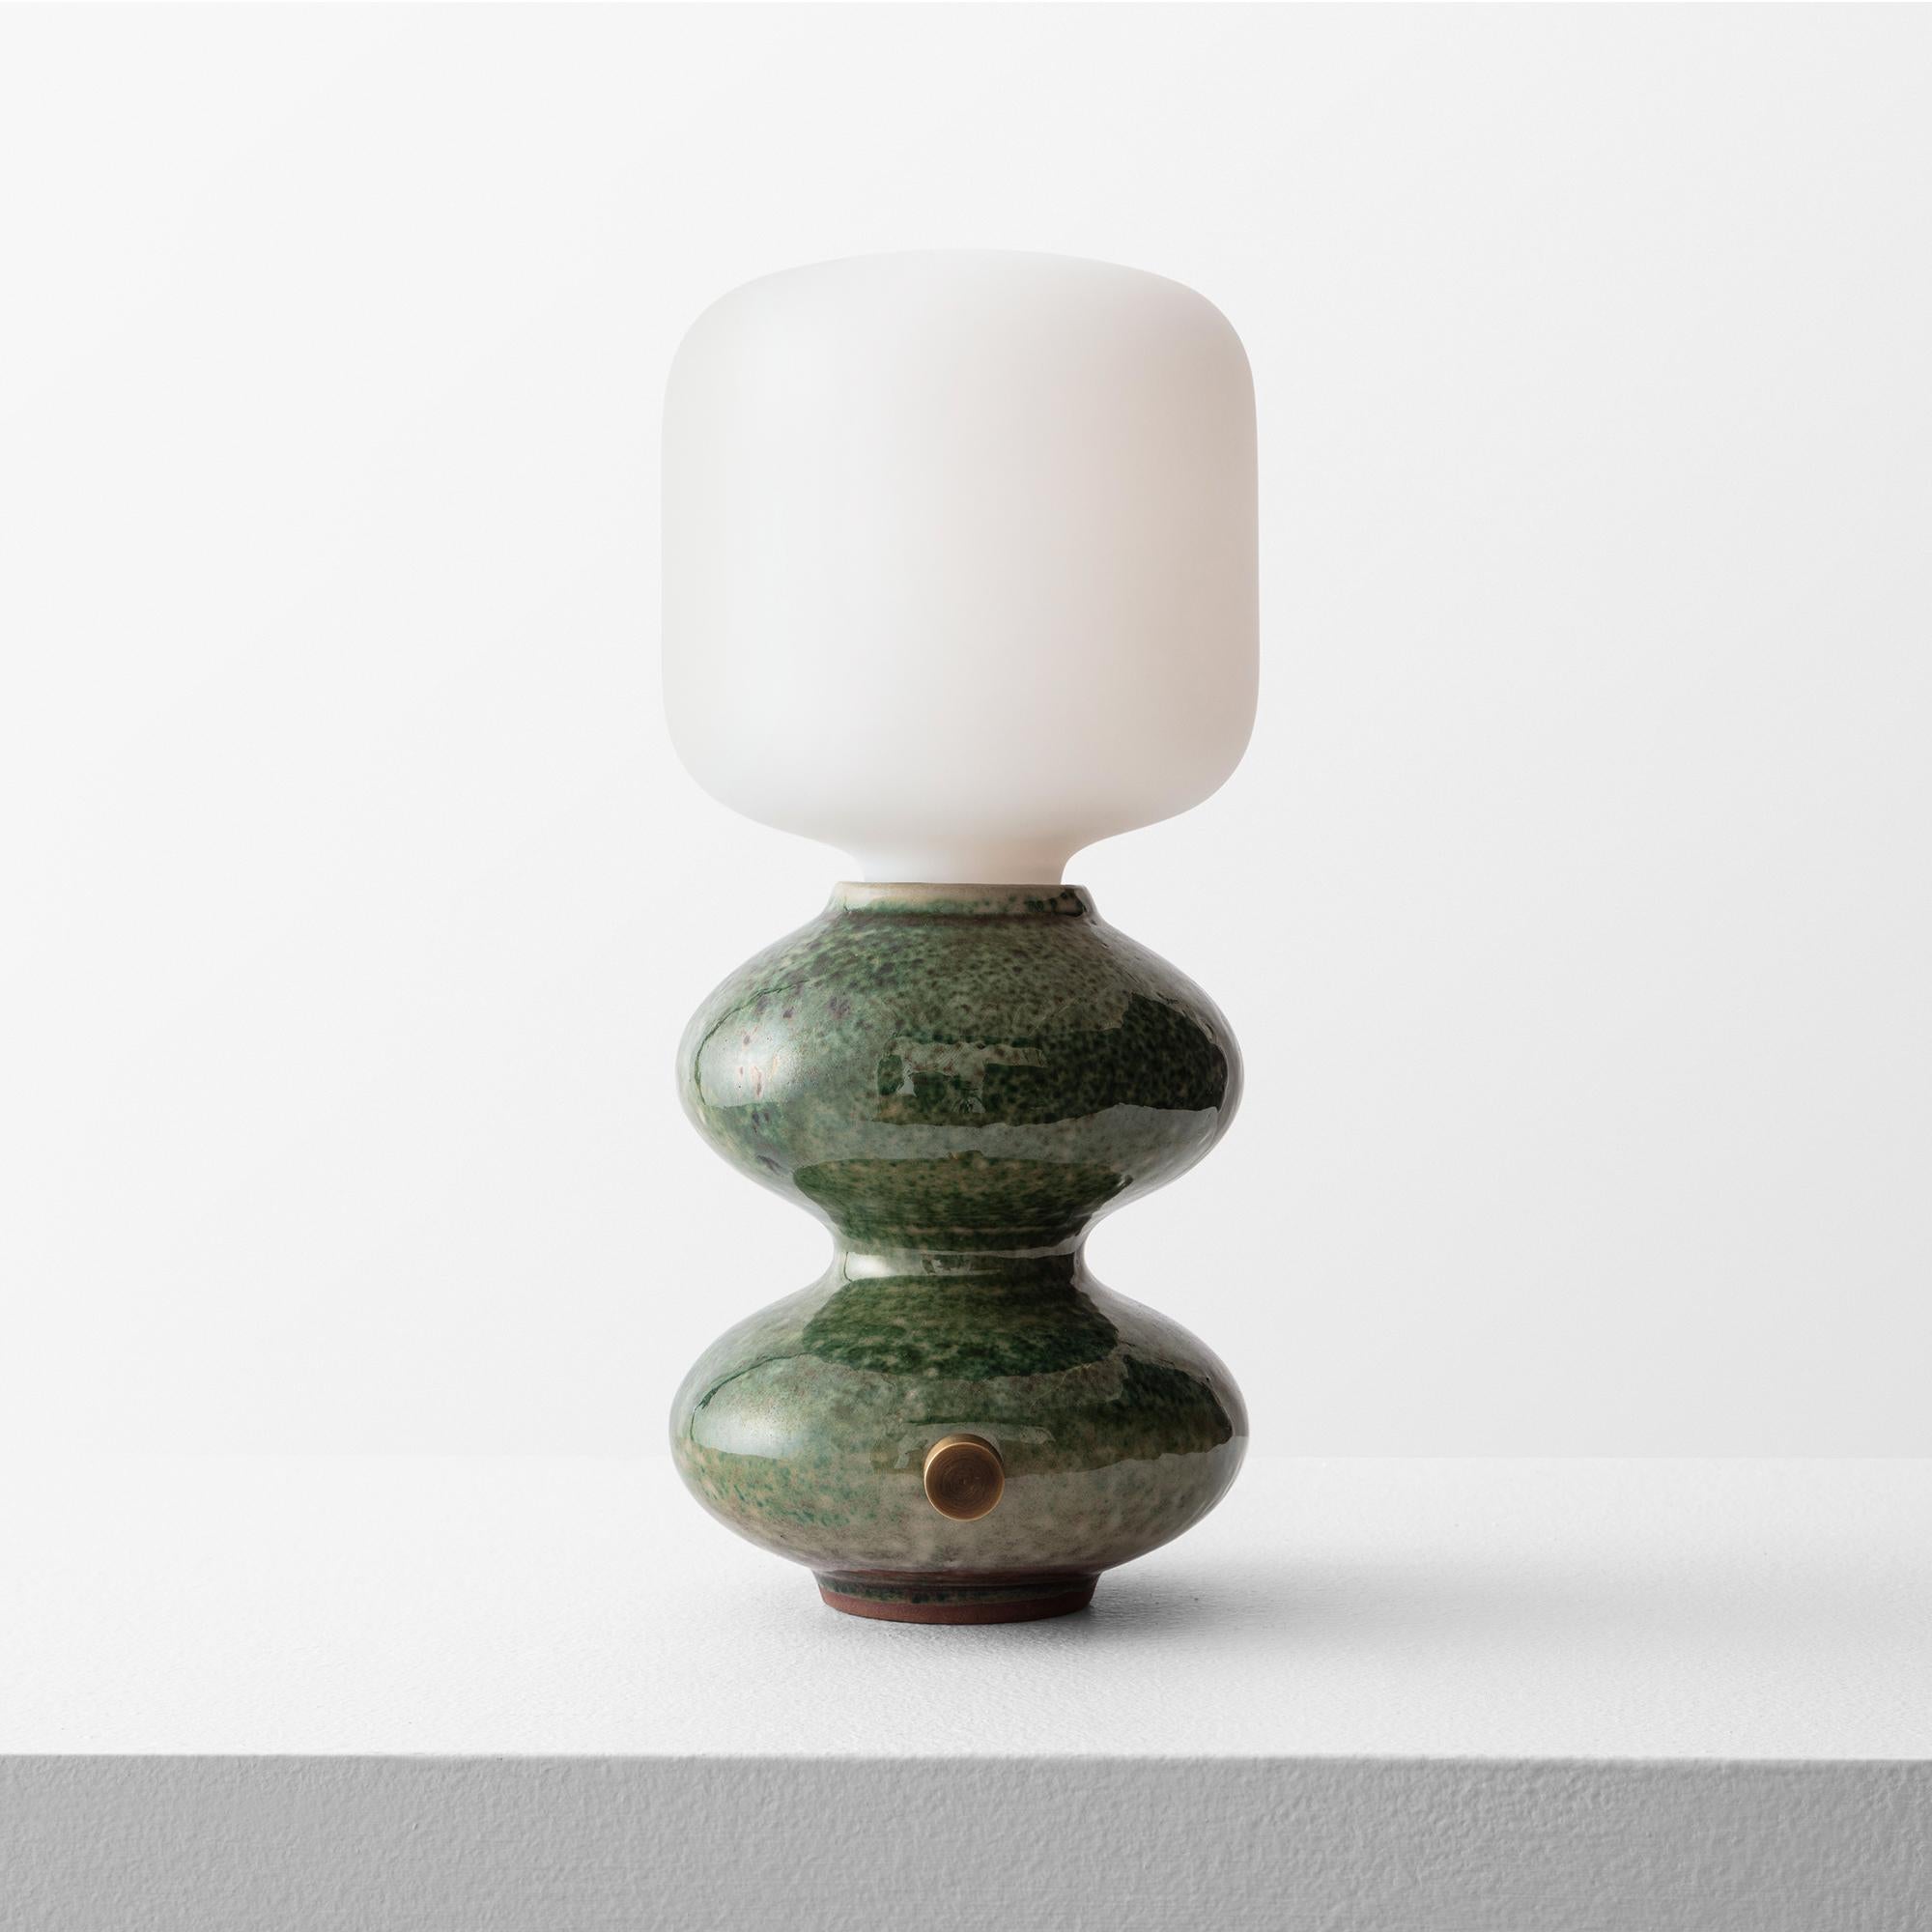 The Wave Form table lamp is a sophisticated approach to our Wave Form signature collection, as it stresses the simplicity of its primal melodic form combined with its proportions with the light source.

Body made of glazed ceramic stoneware. This